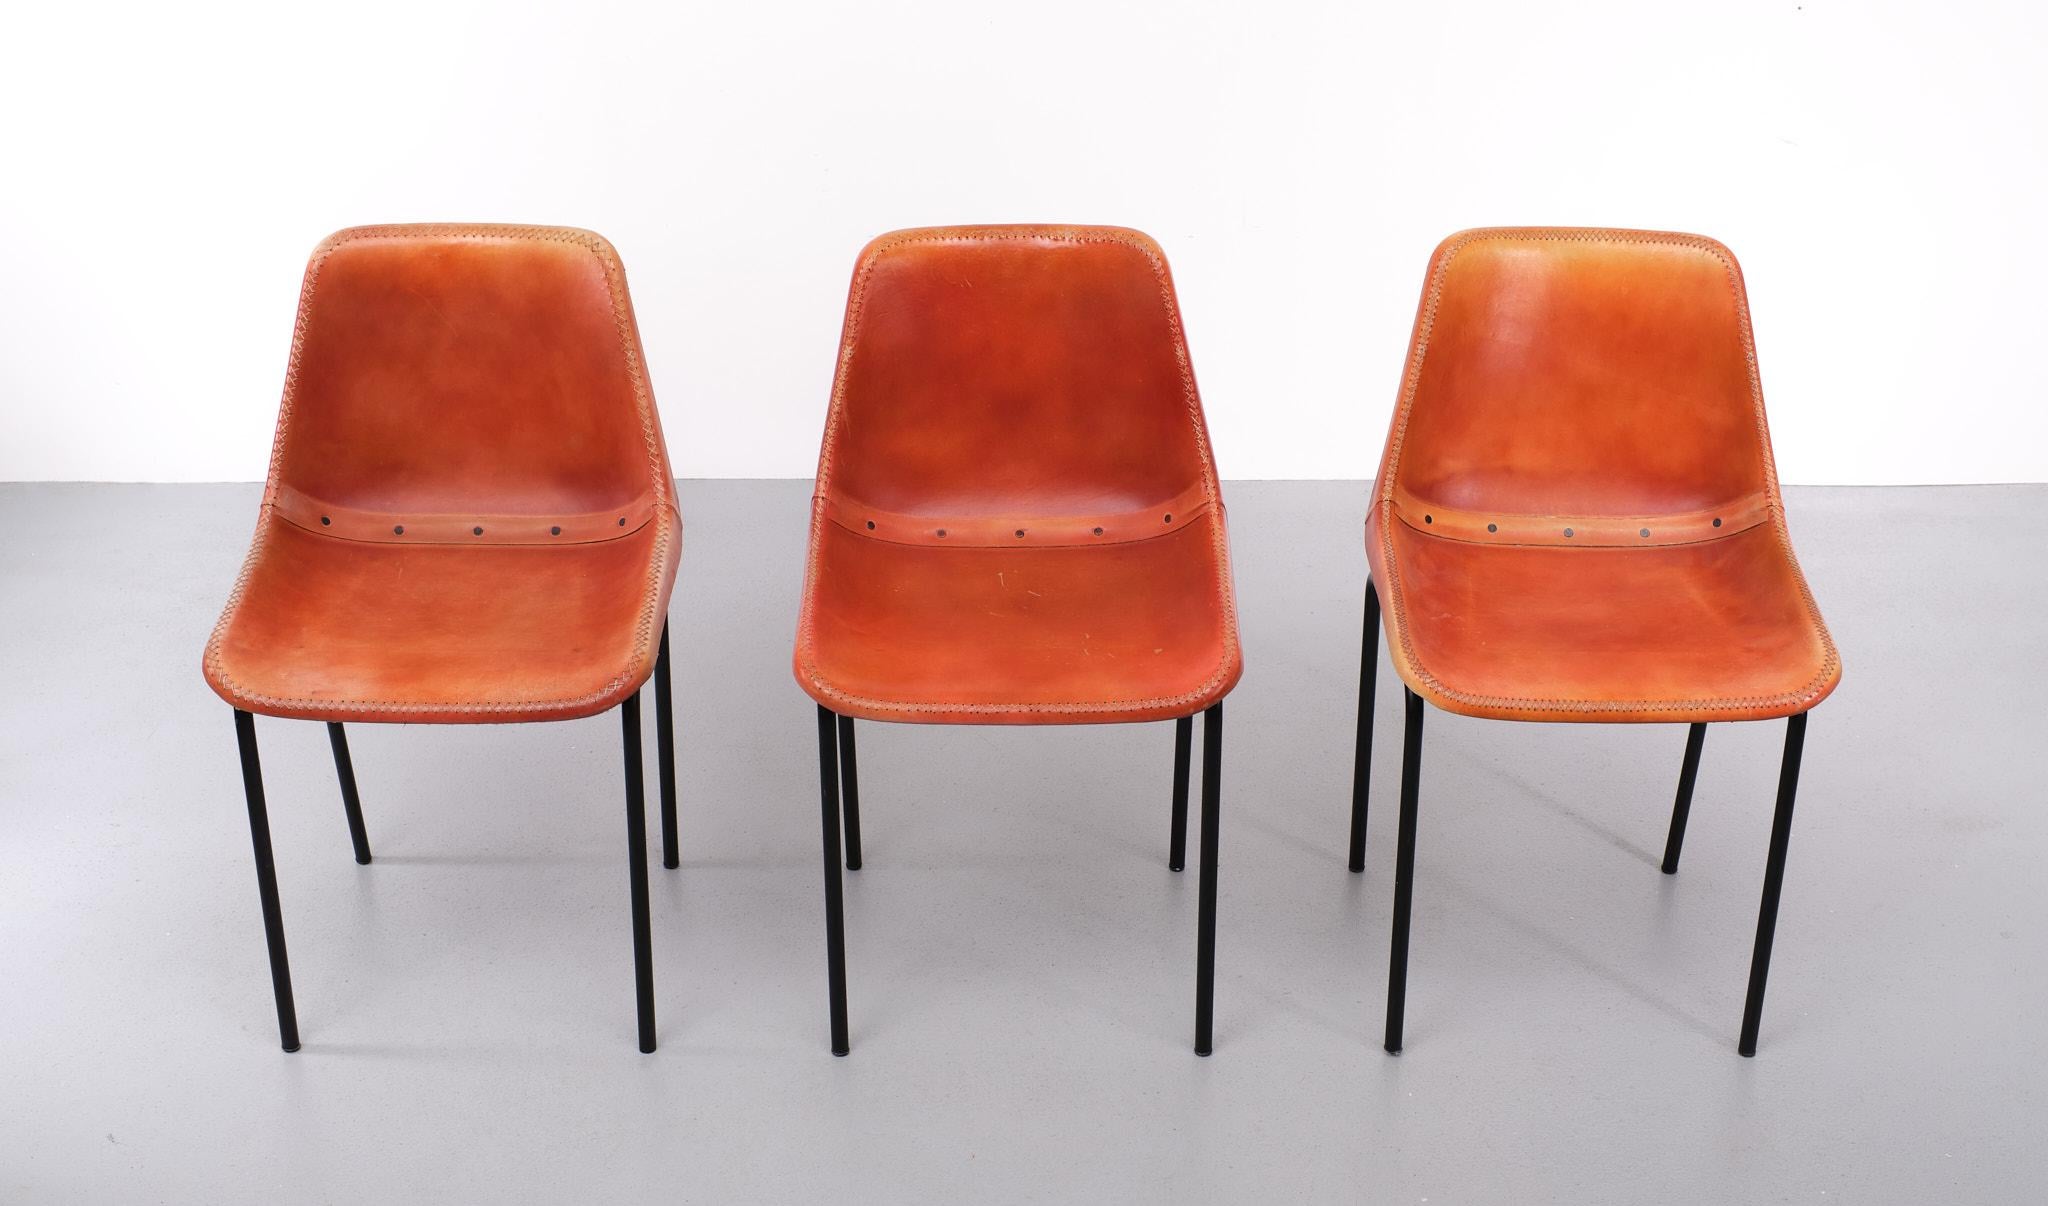 kare design chairs